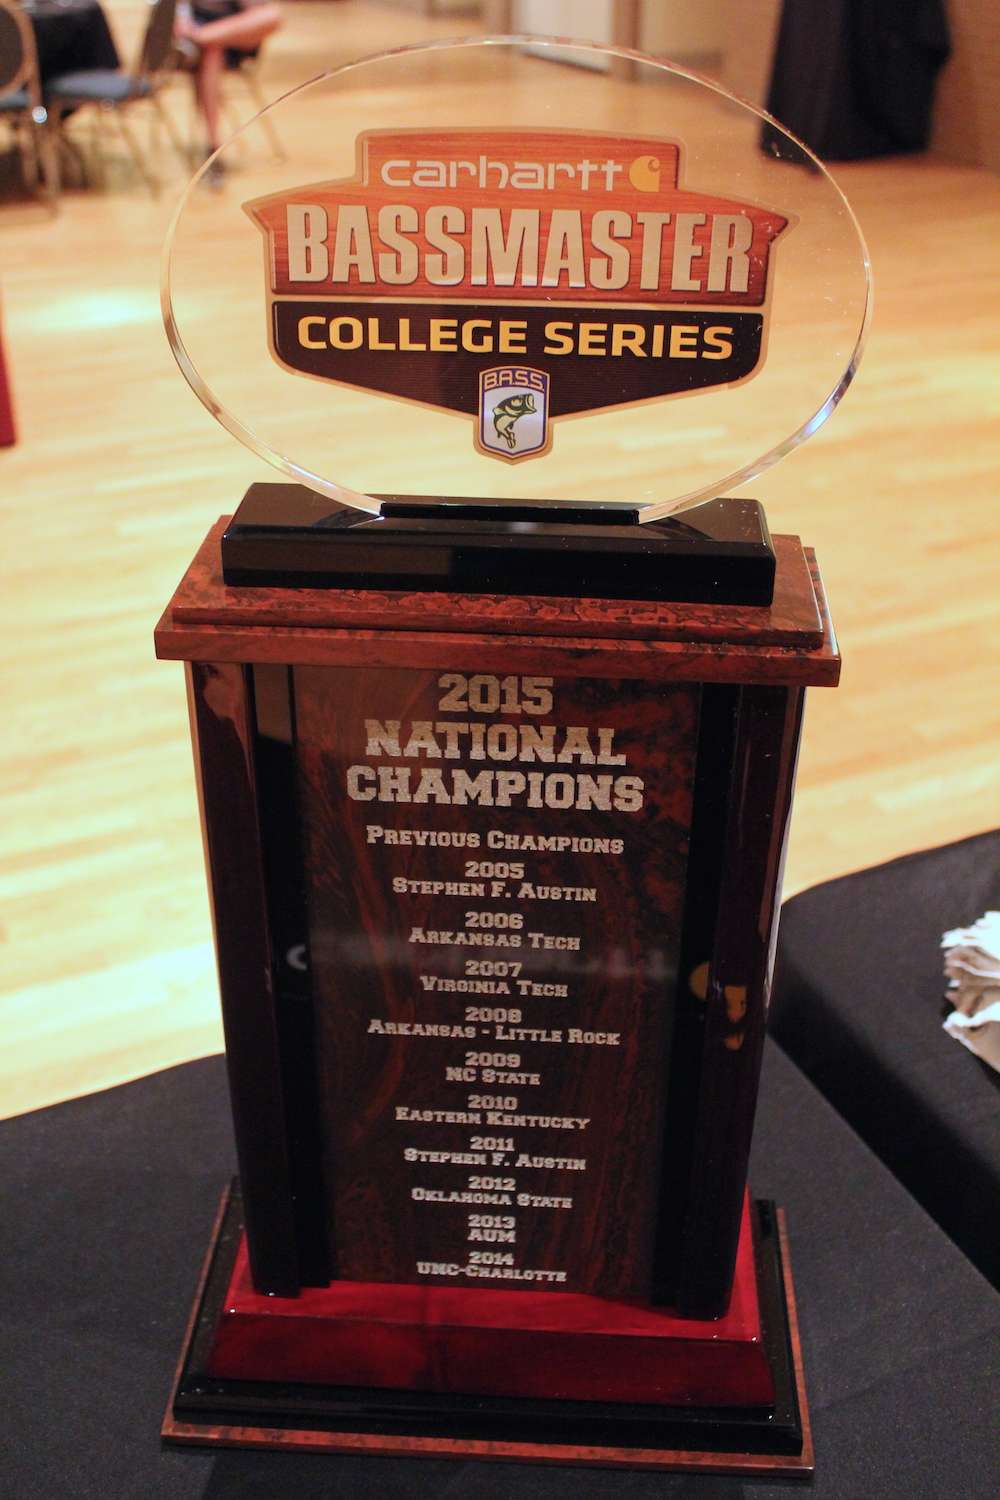 The mac daddy of them all for college fishing, the Carhartt Bassmaster College Series National Champion's trophy. 